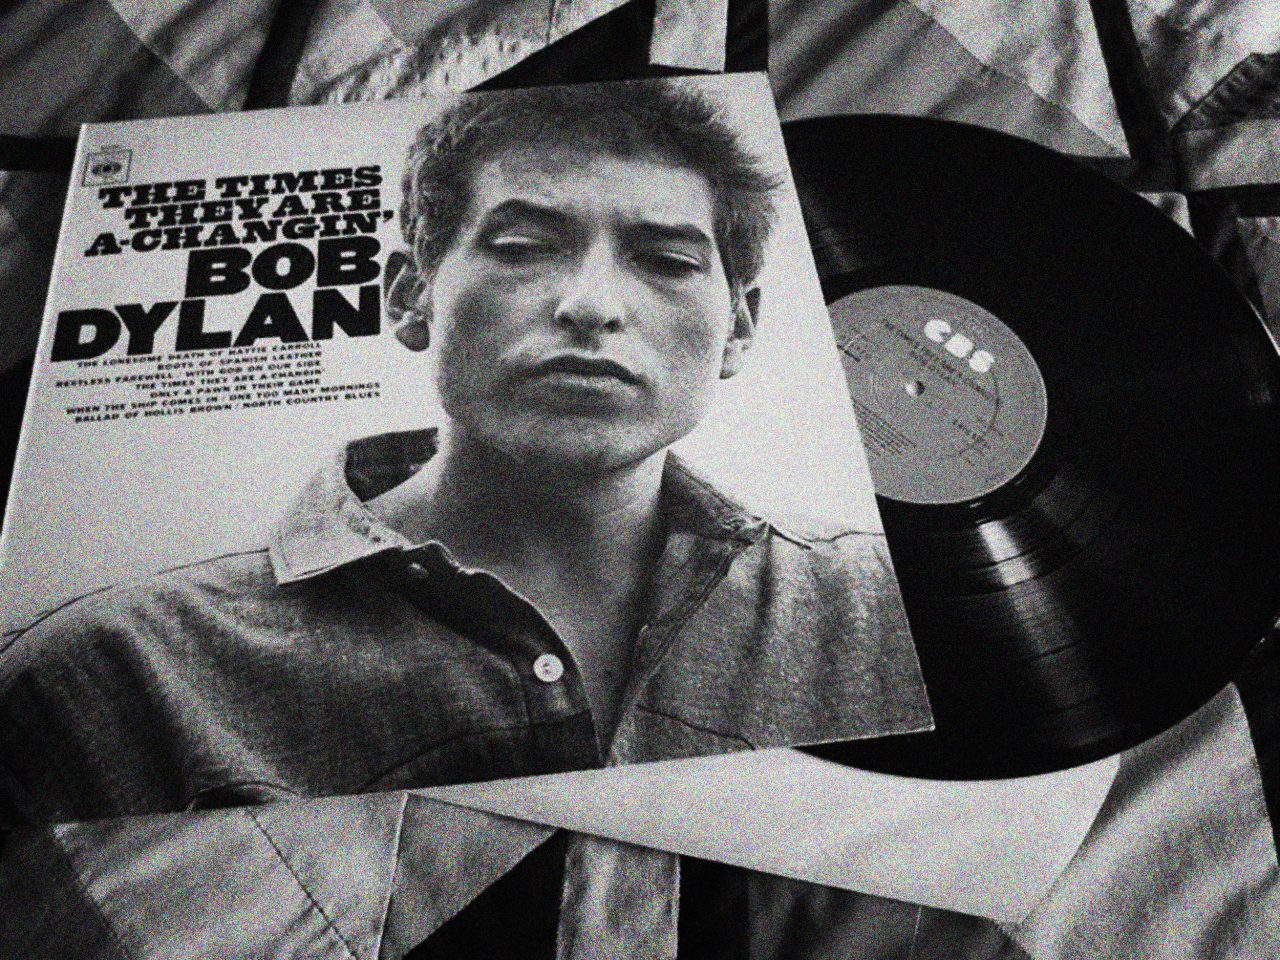 Bob Dylan – The Times they are a-Changin'